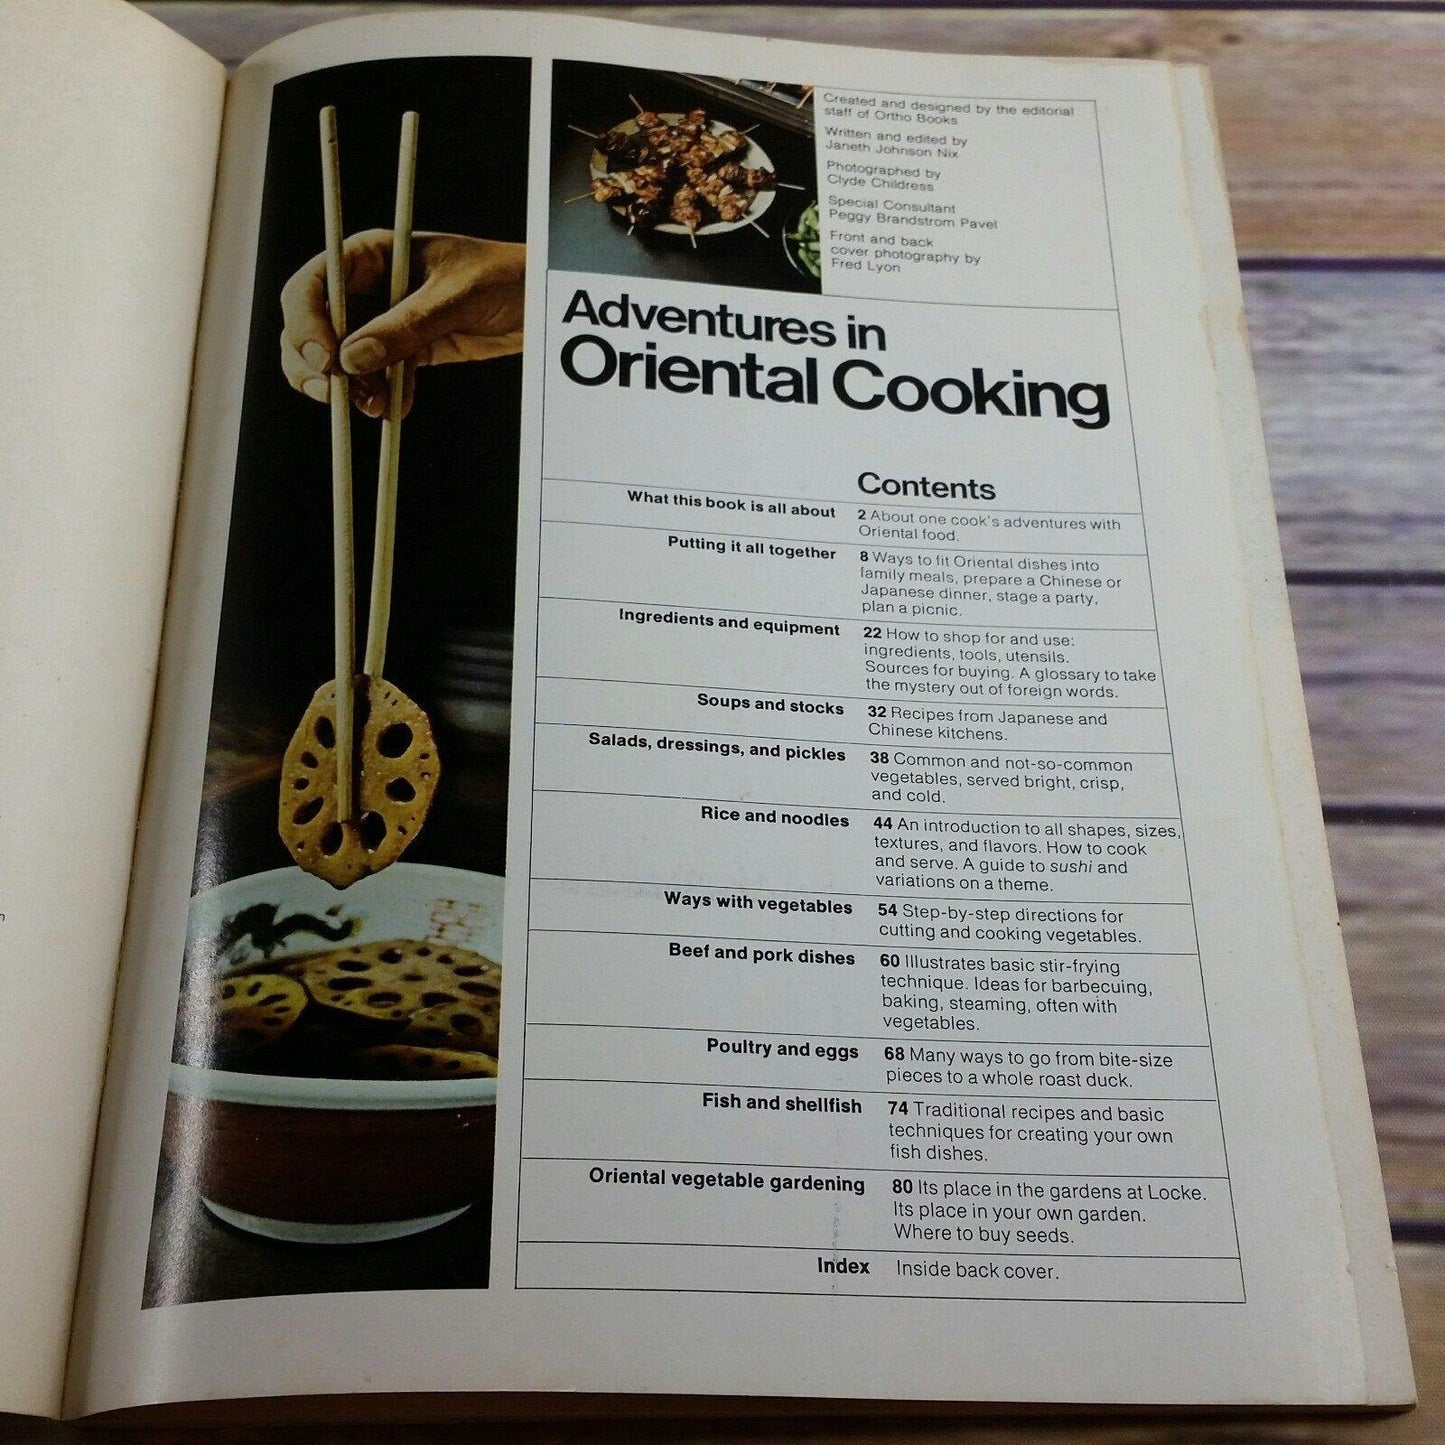 Vintage Cookbook Oriental Cooking Chinese Japanese Recipes Food 1976 Ortho Books Chevron Chemical